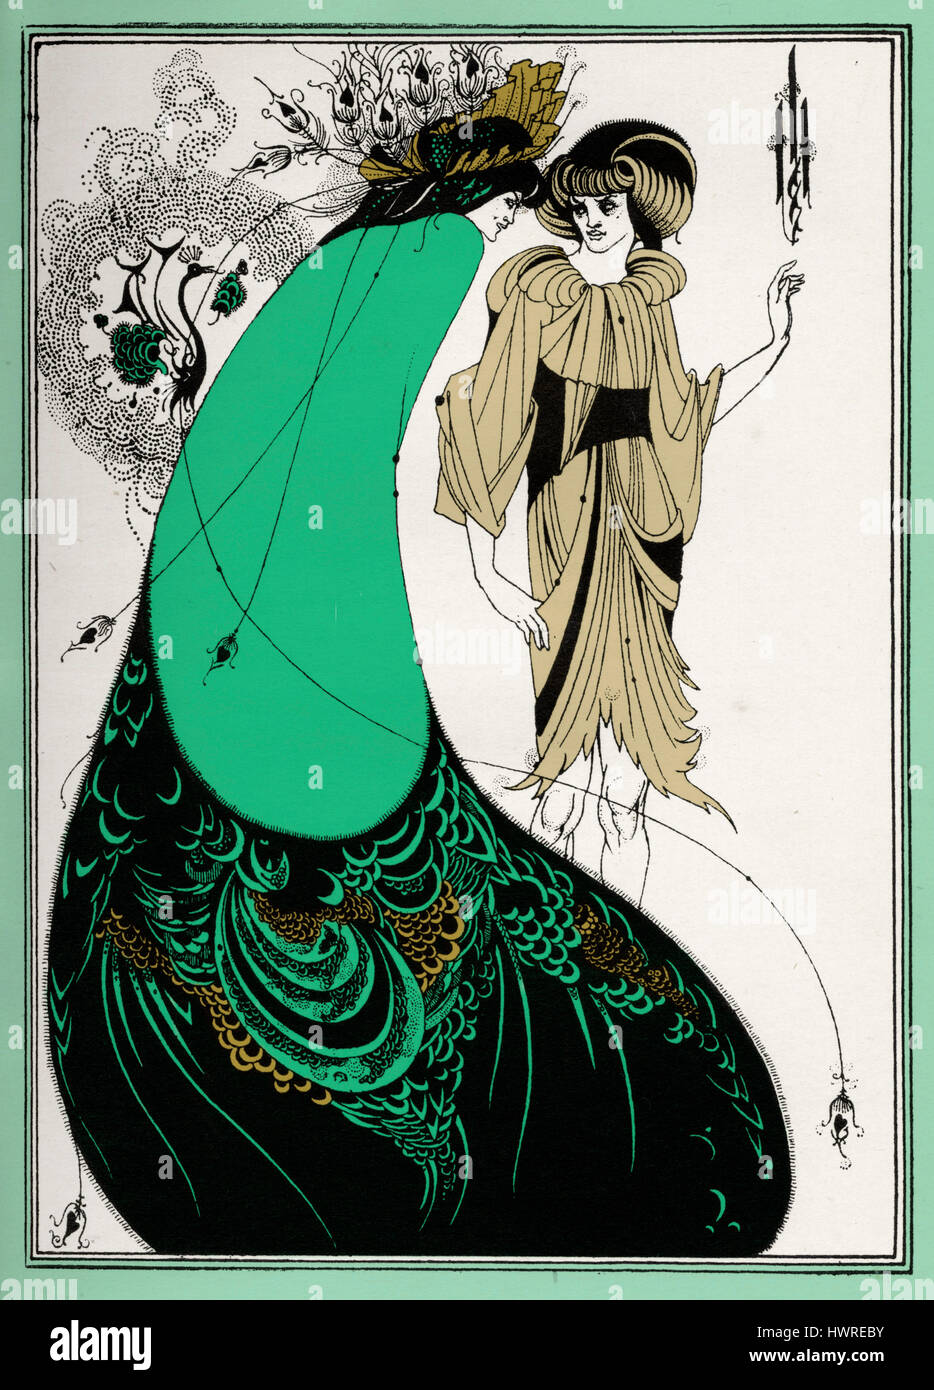 ' The Peacock Skirt ' - Aubrey Beardsley 's illustration for  ' Salome ' by Oscar Wilde first performed in England on 10 May 1905.  Richard Strauss 's opera based on this this book premiered 9 December 1905 Dresden. Stock Photo